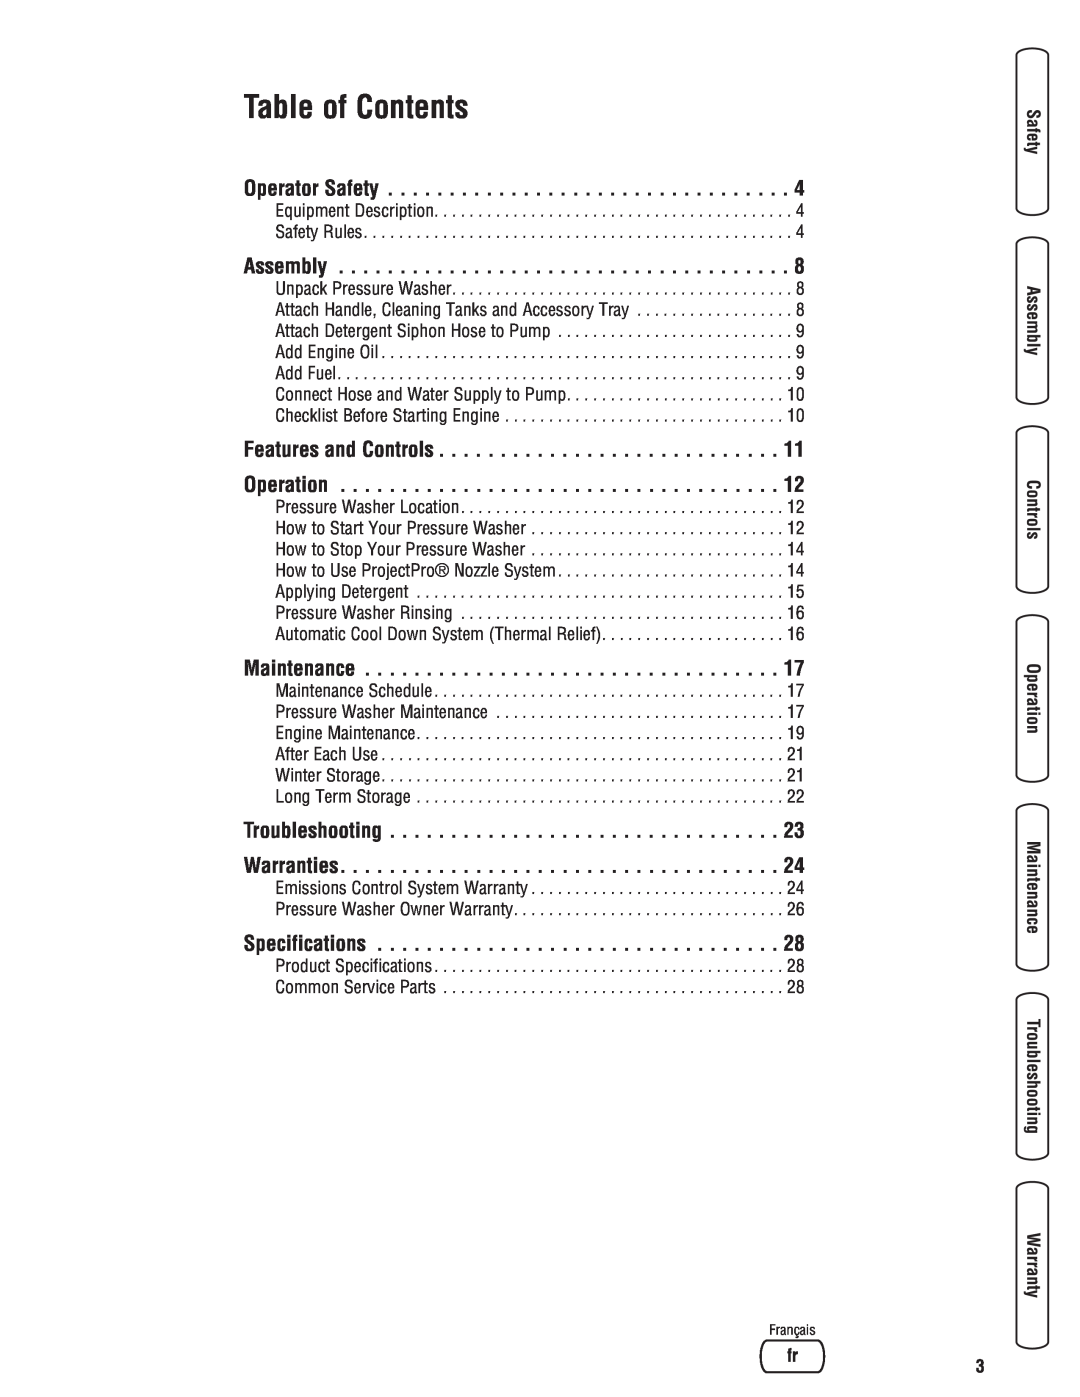 Briggs & Stratton 2900 PSI manual Table of Contents, Français 